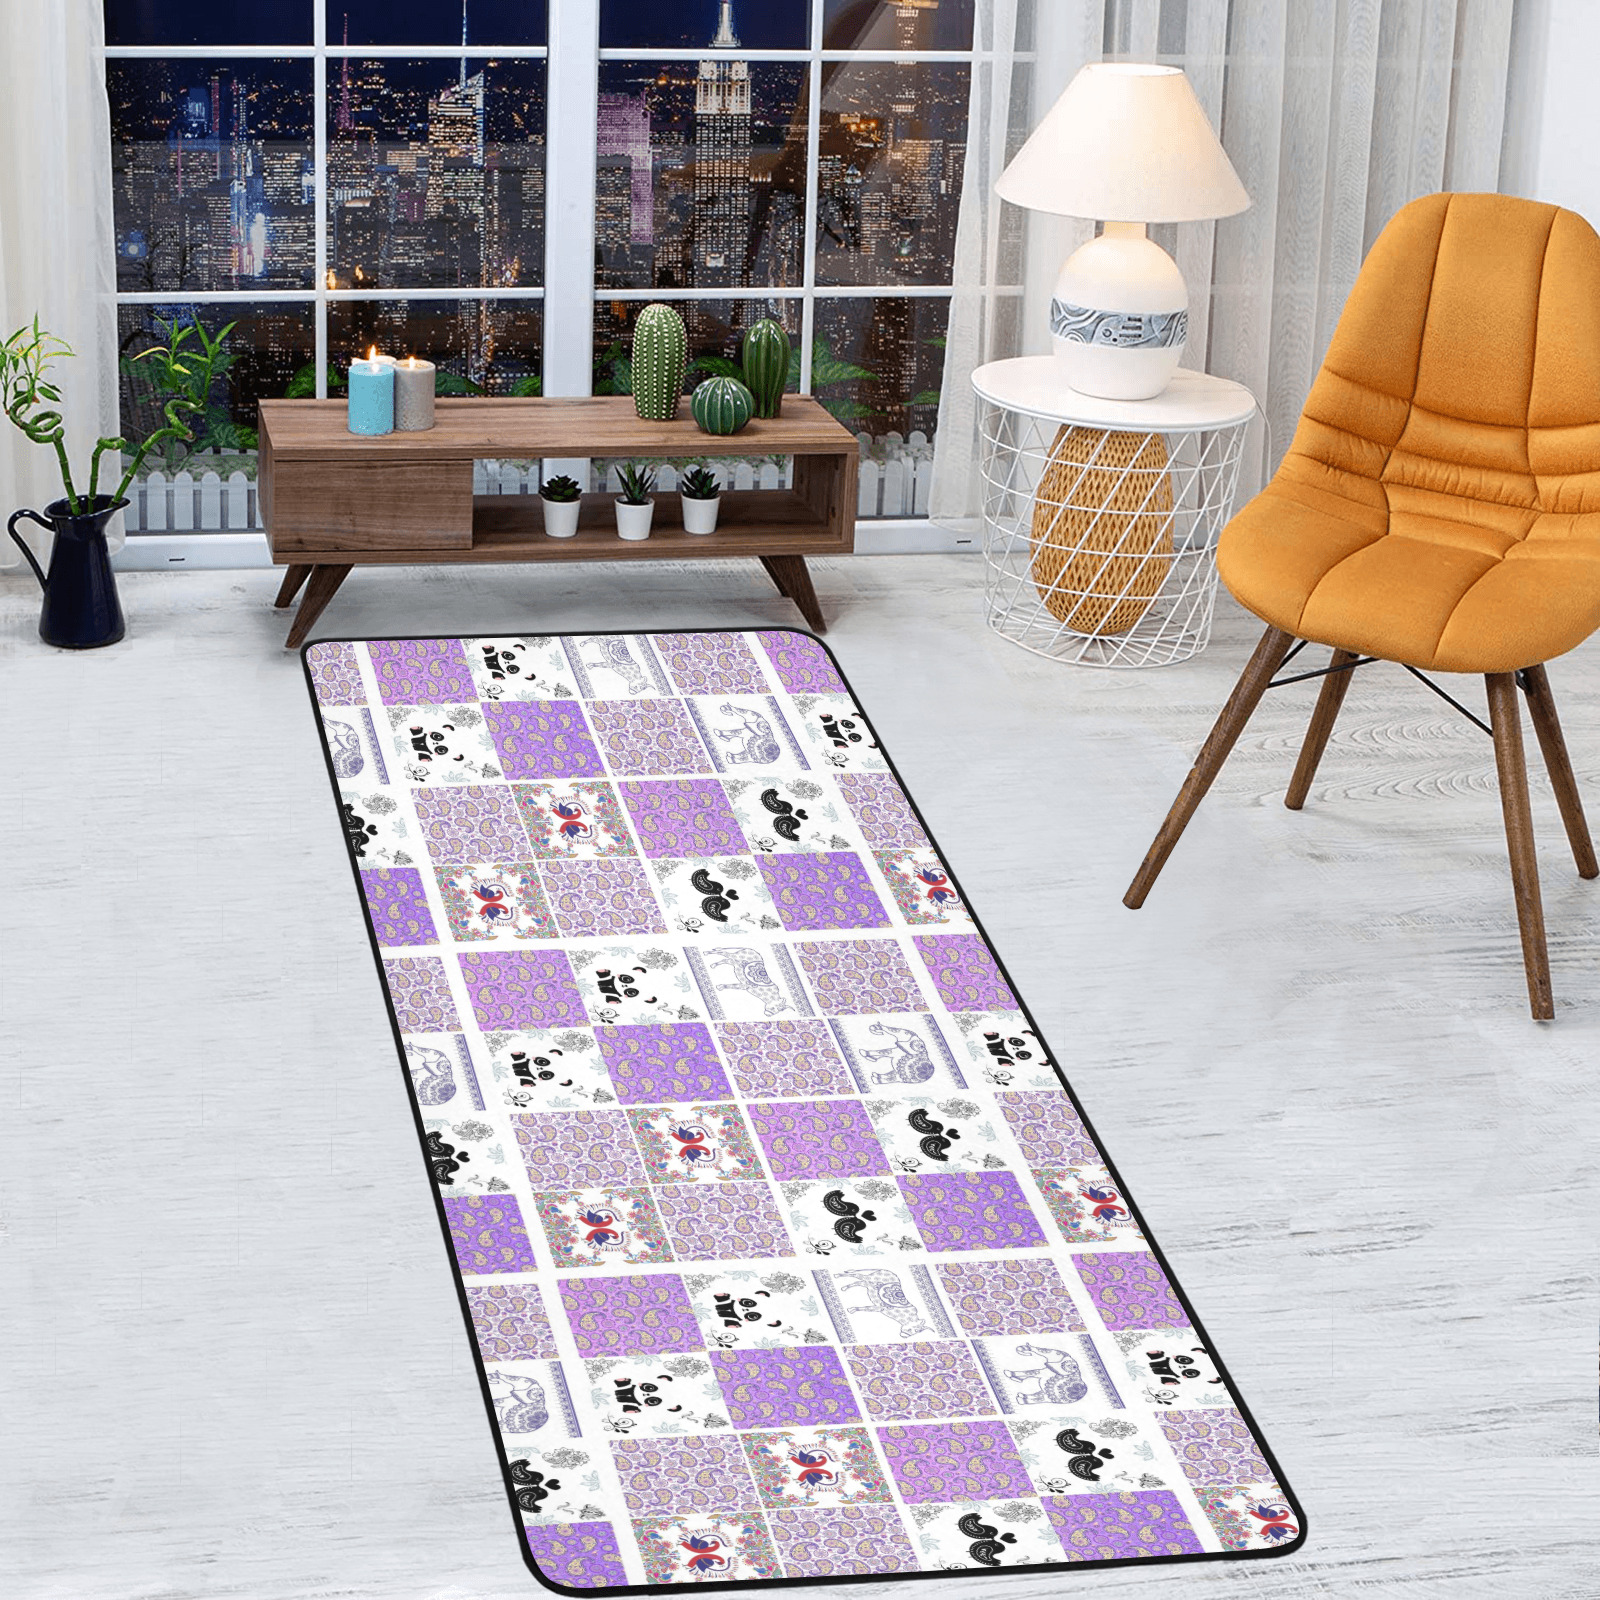 Purple Paisley Birds and Animals Patchwork Design Area Rug with Black Binding  7'x3'3''